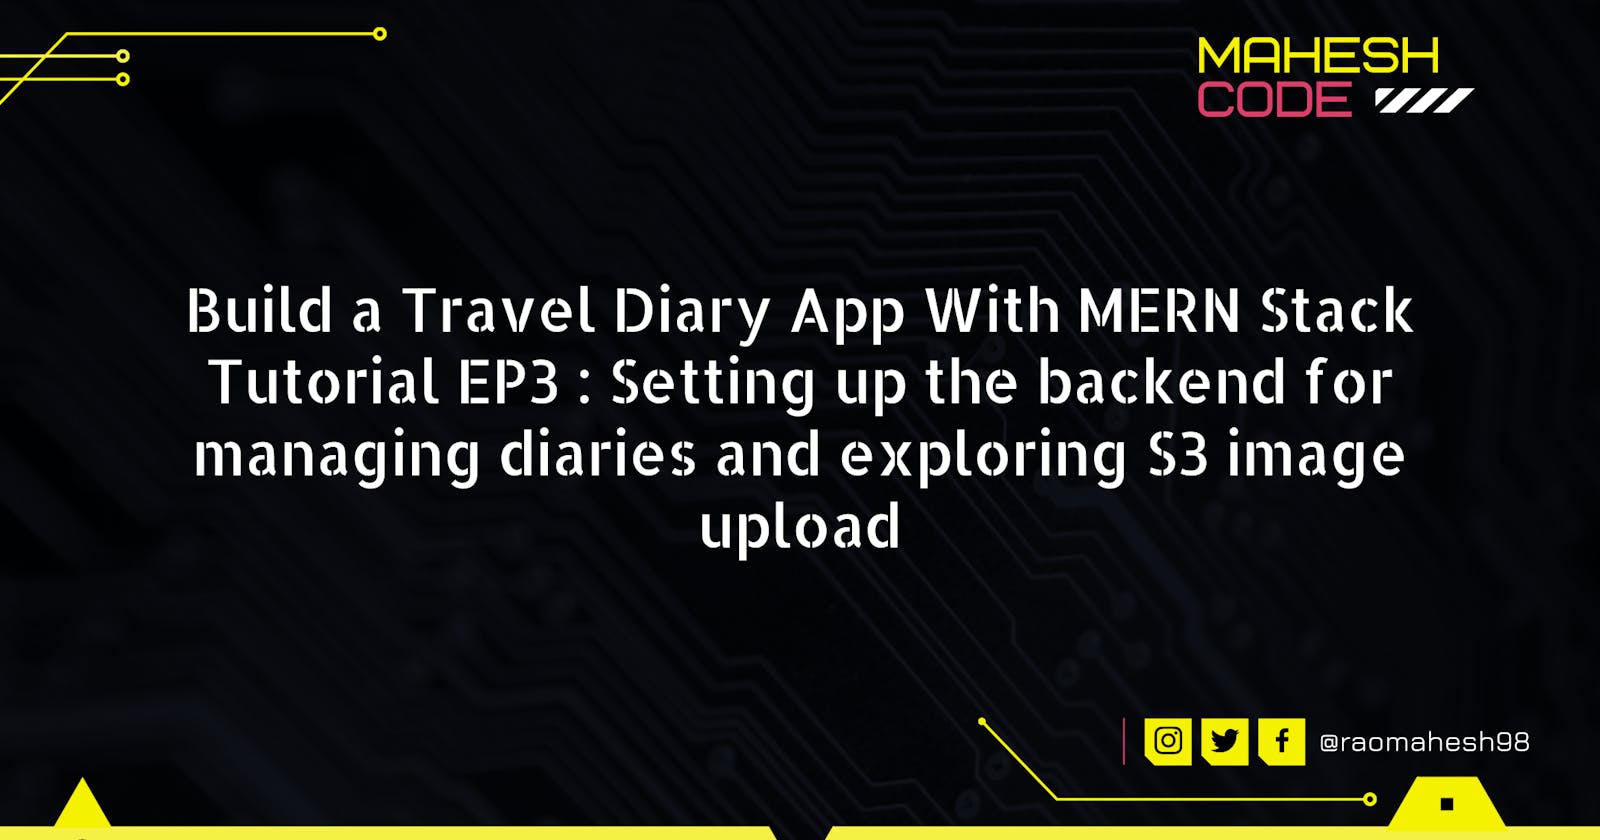 Build a Travel Diary App With MERN Stack Tutorial EP3 : Setting up the backend for managing diaries and exploring S3 image upload